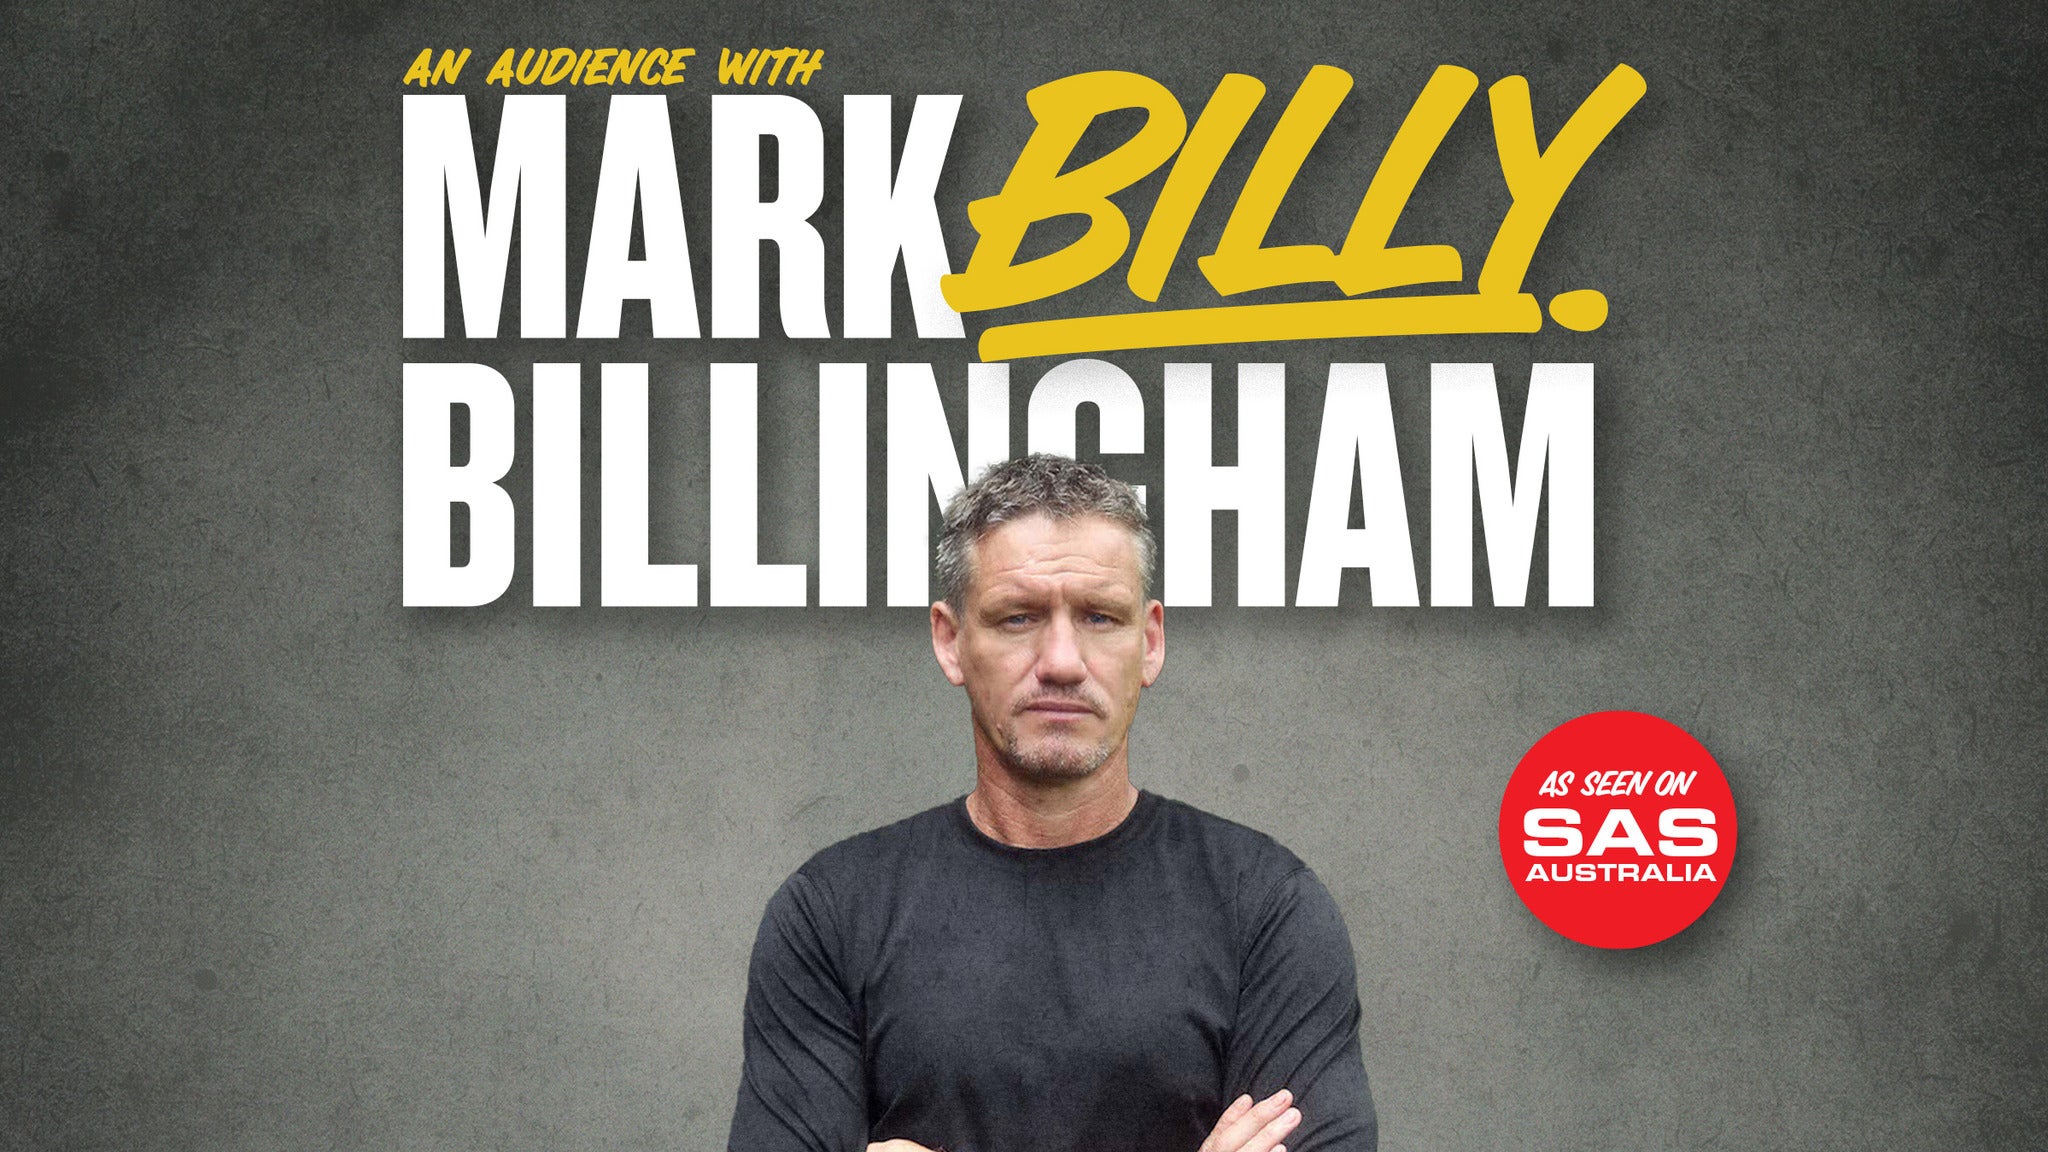 An Audience with Mark "Billy" Billingham